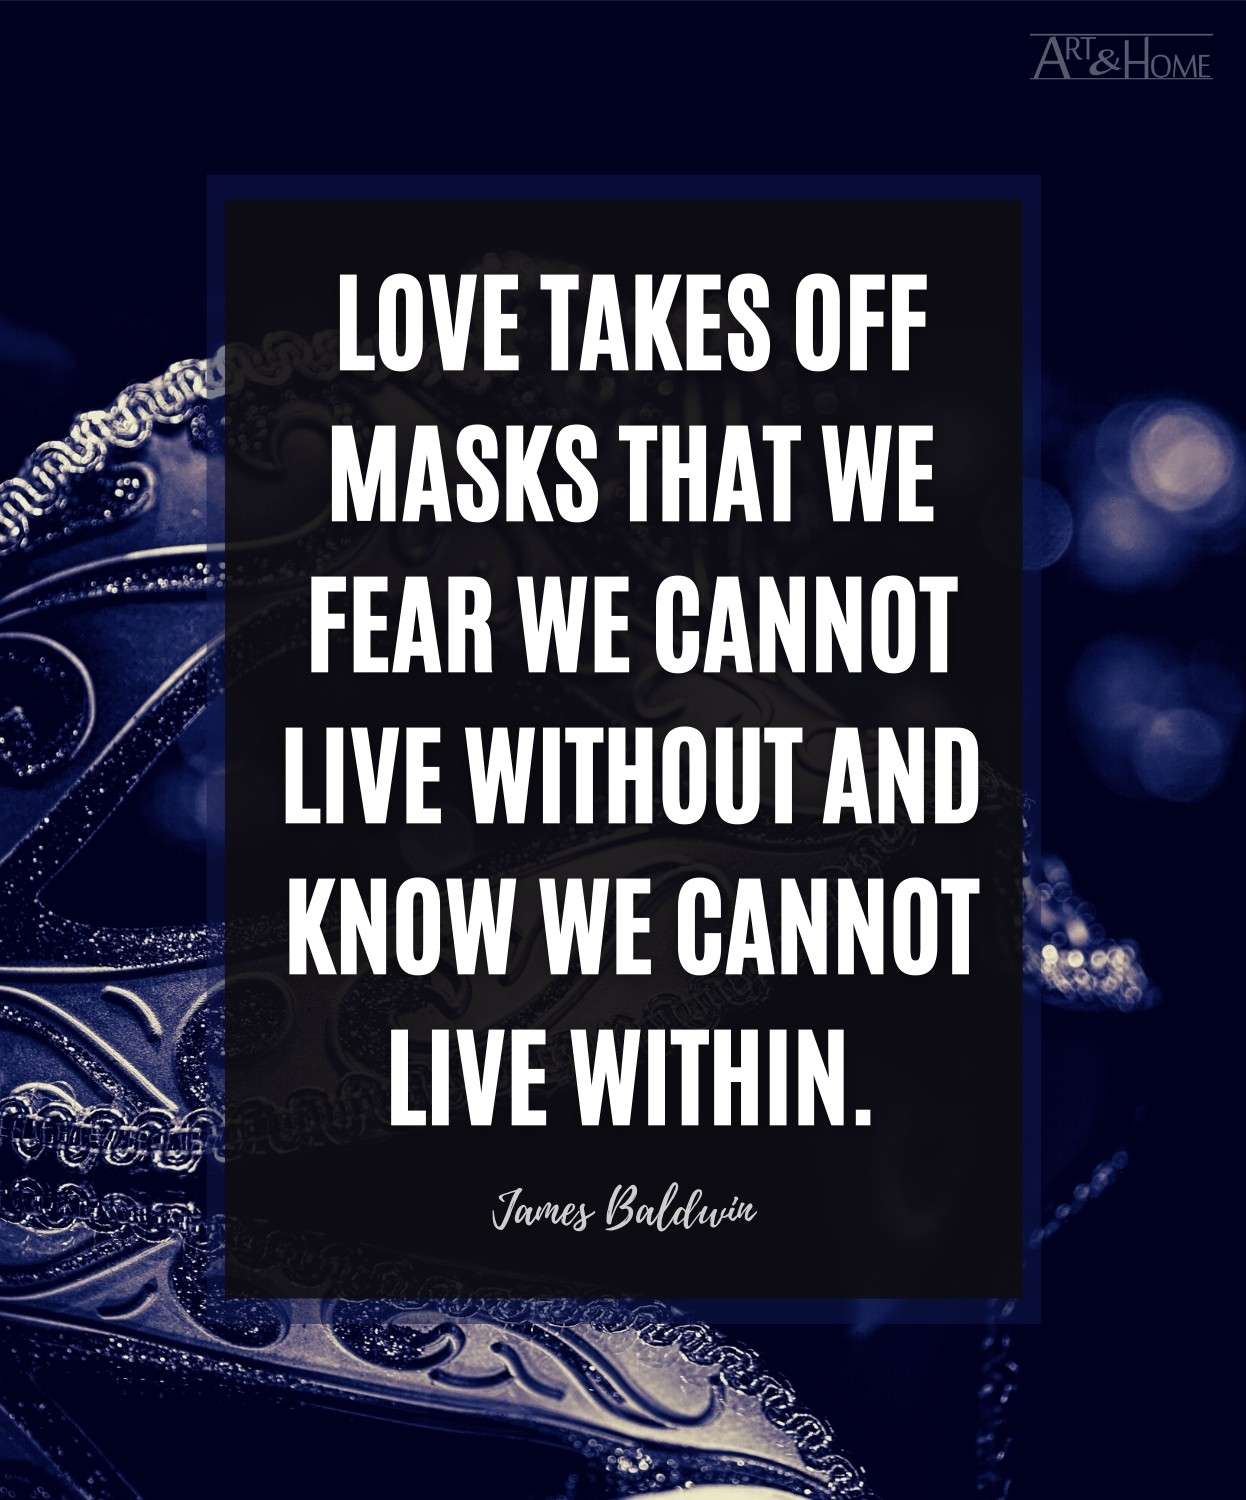 Love Takes off the Masks James Baldwin Inspirational Poster